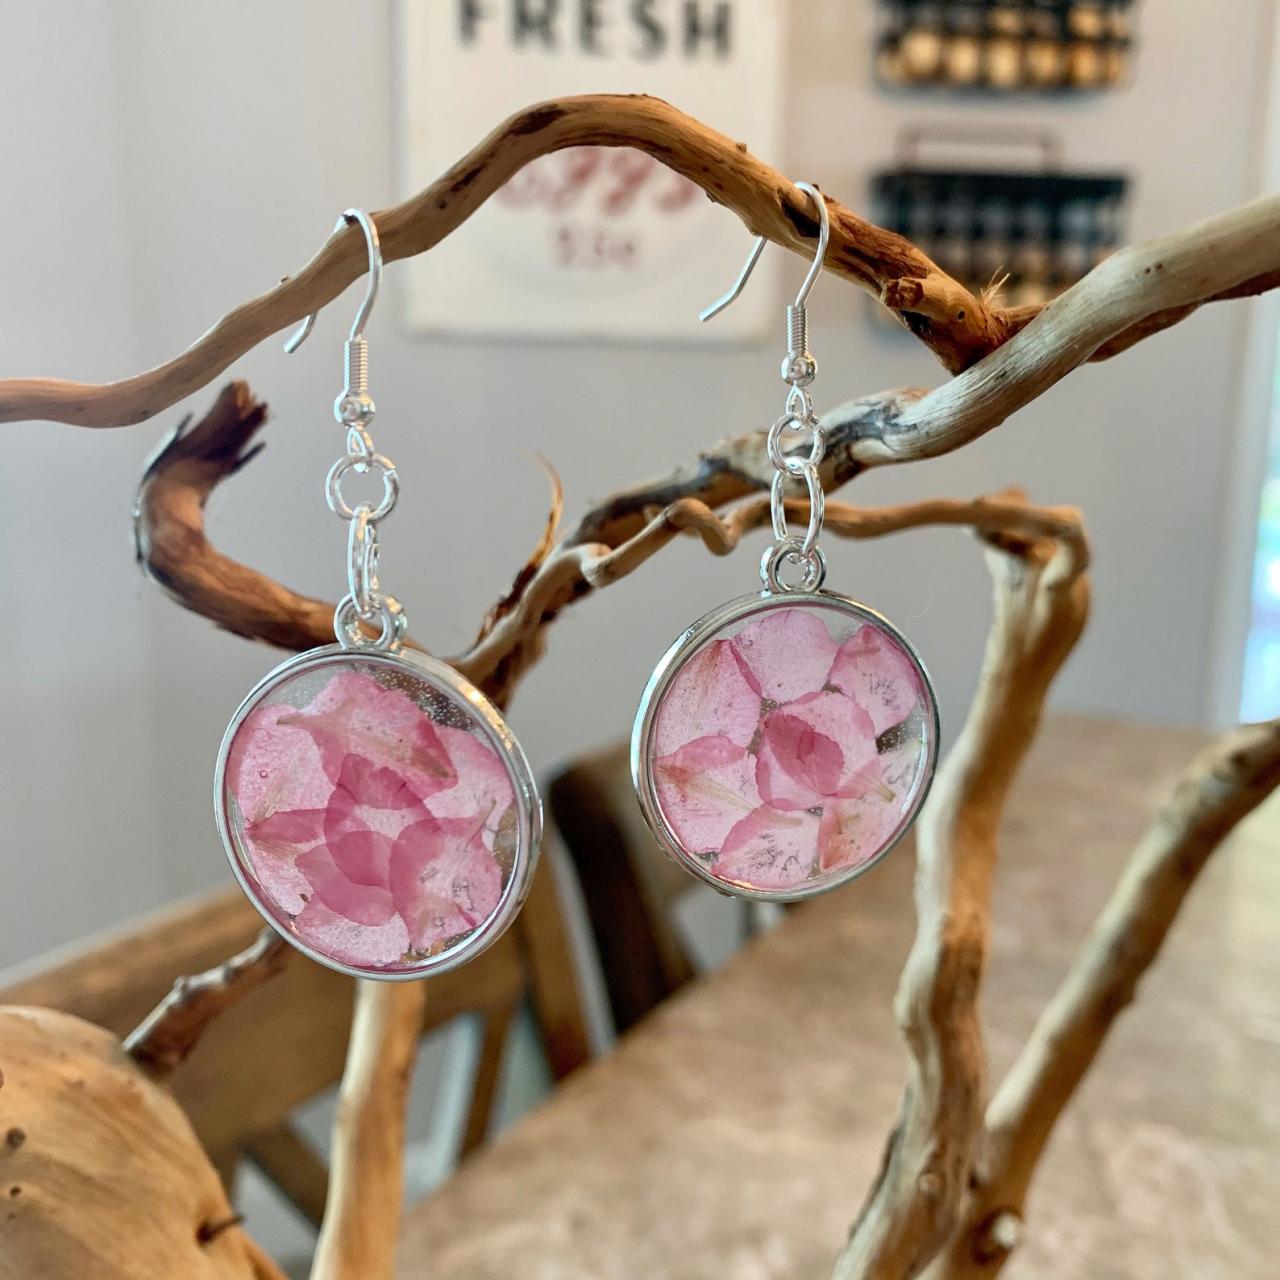 Pressed Dried Flowers Earrings, Resin Flower Jewelry, Unique Gift For Grad,preserved Flowers, Boho, Minimalist Jewelry Gifts, Nature Gift, Pink